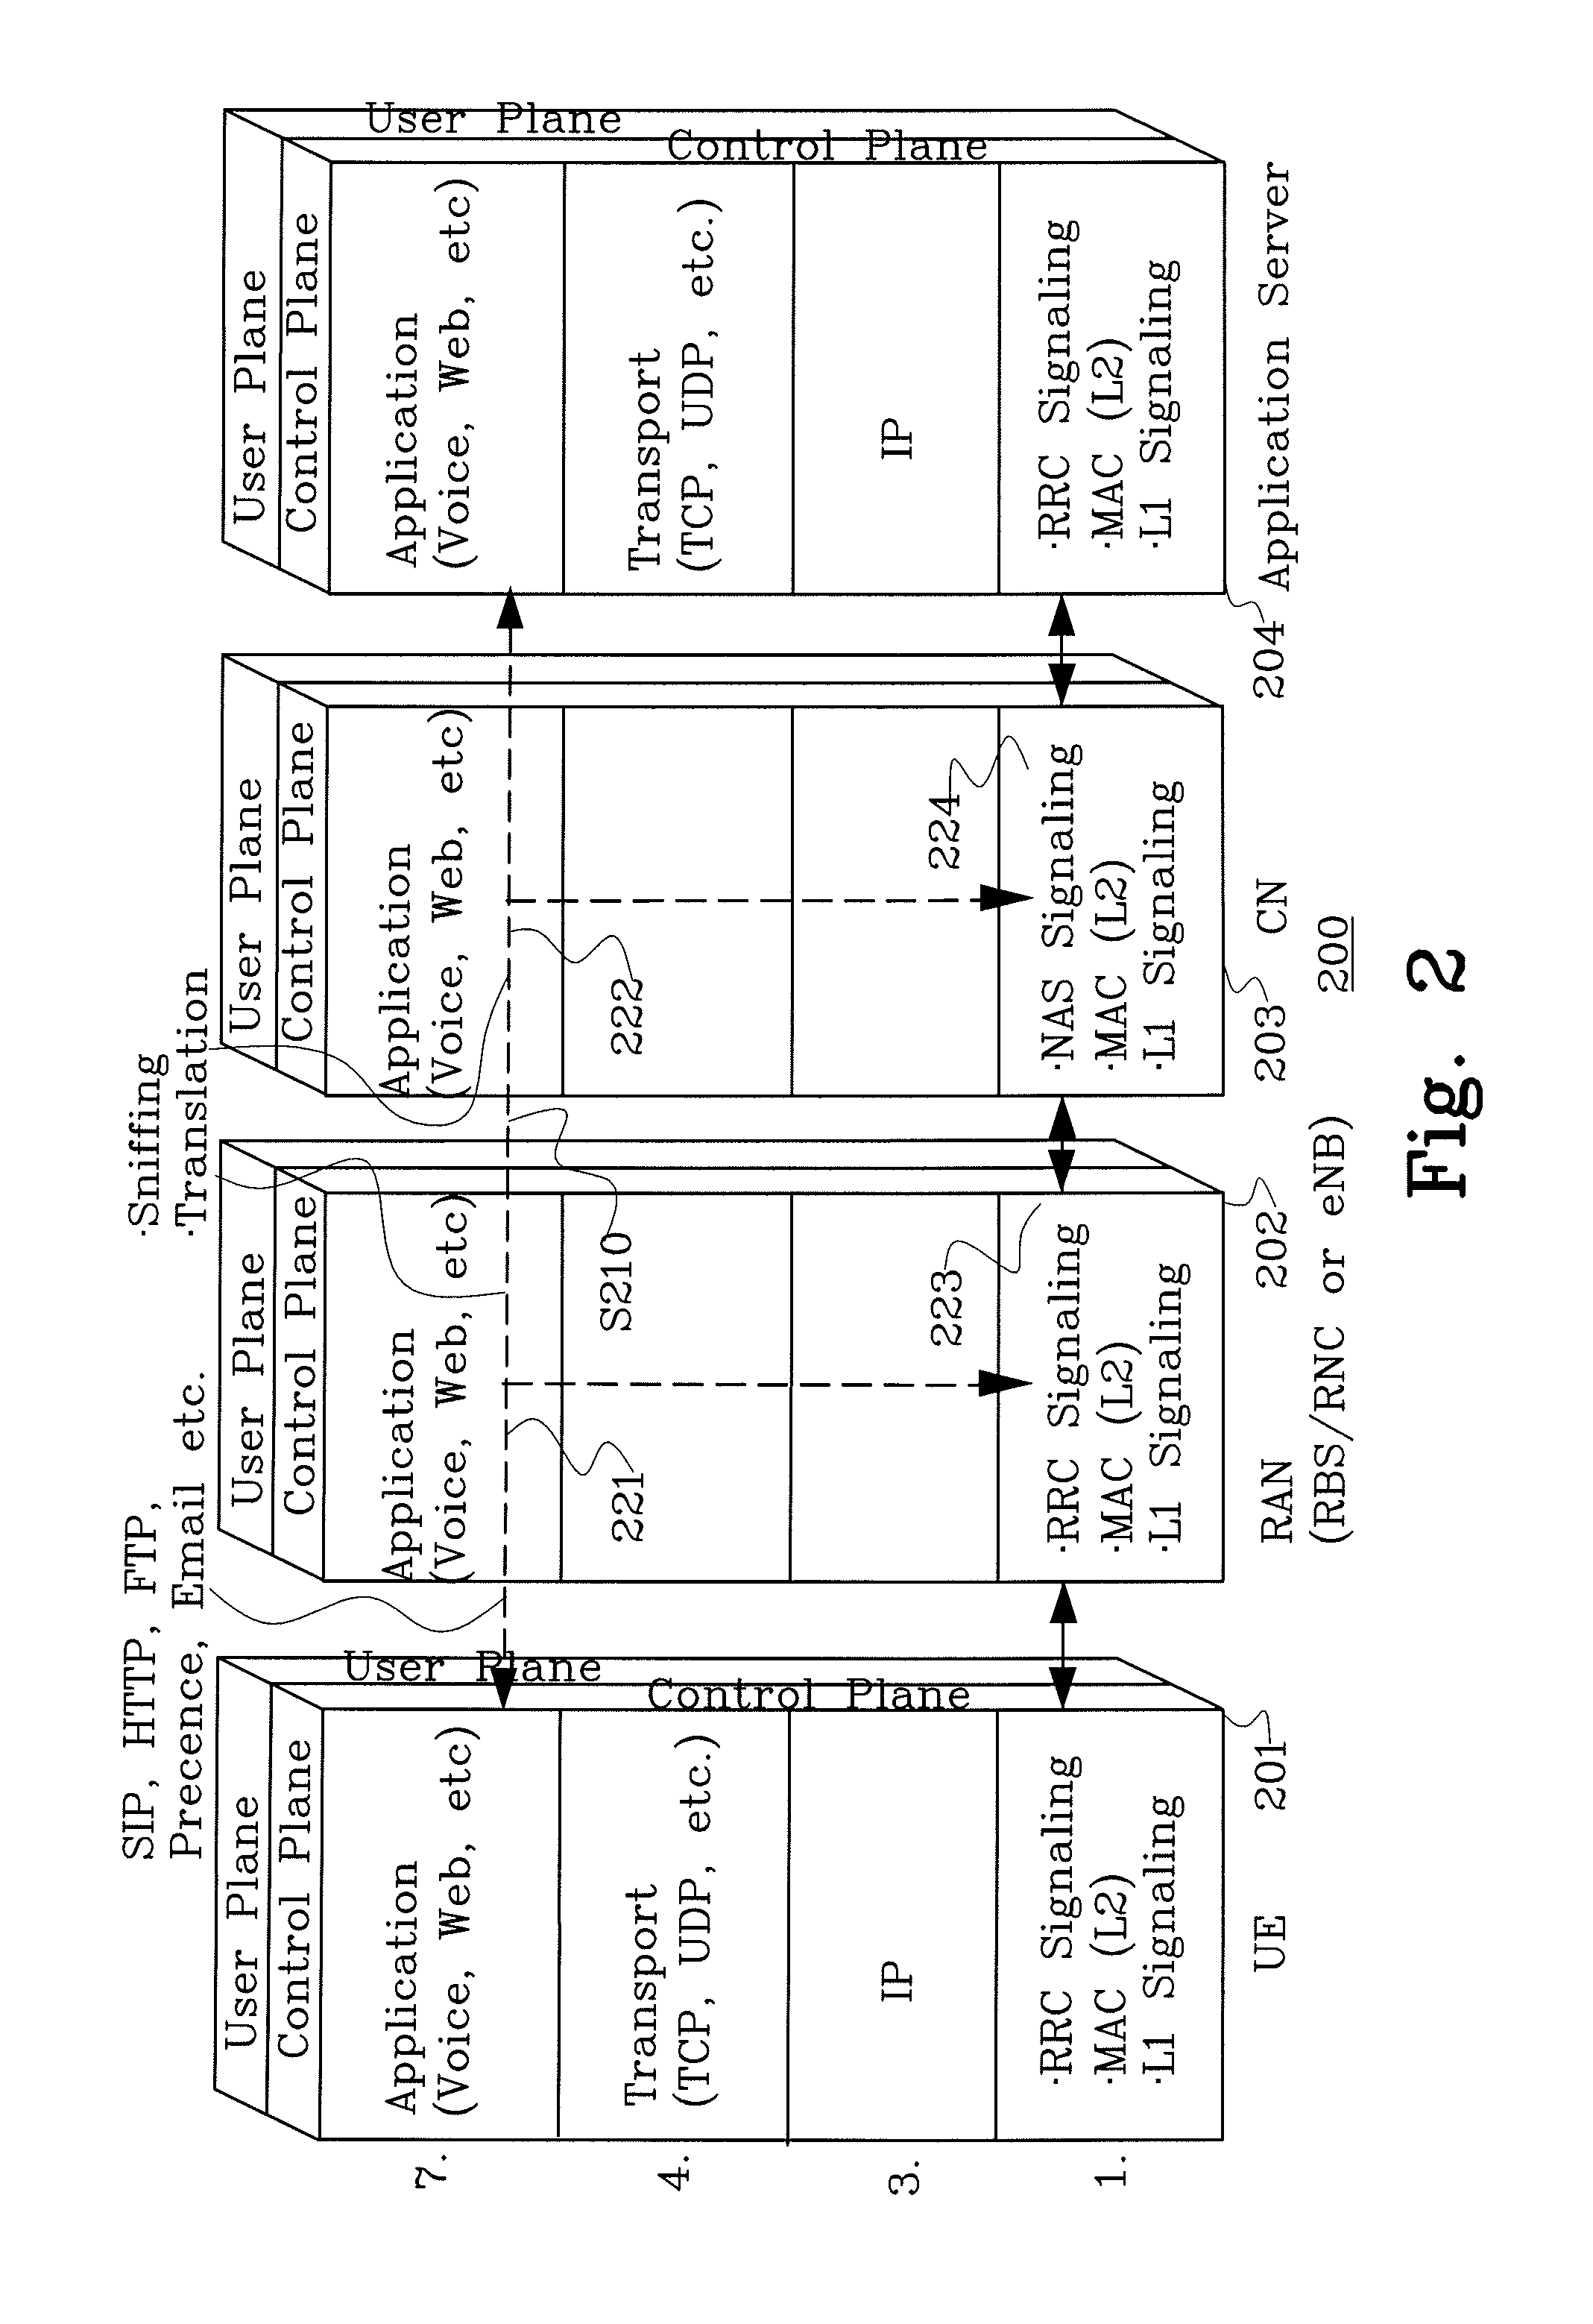 Optimizing the usage of radio resources by cross-layer reading of information from higher level control plane protocol layer